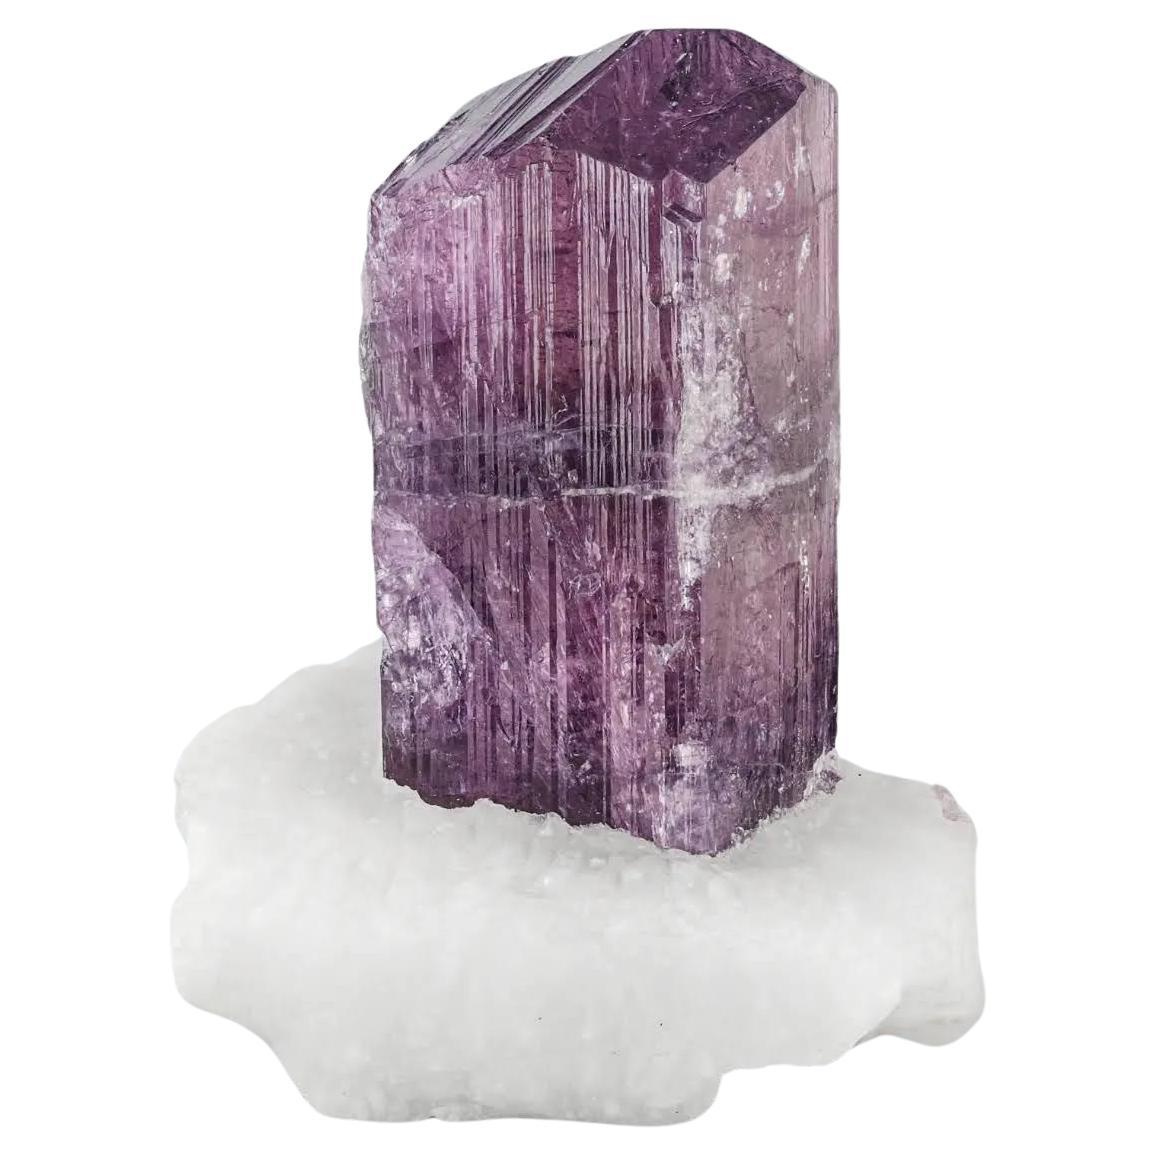 Vibrant Purple Color Scapolite Crystal On Calcite Matrix From Afghanistan For Sale